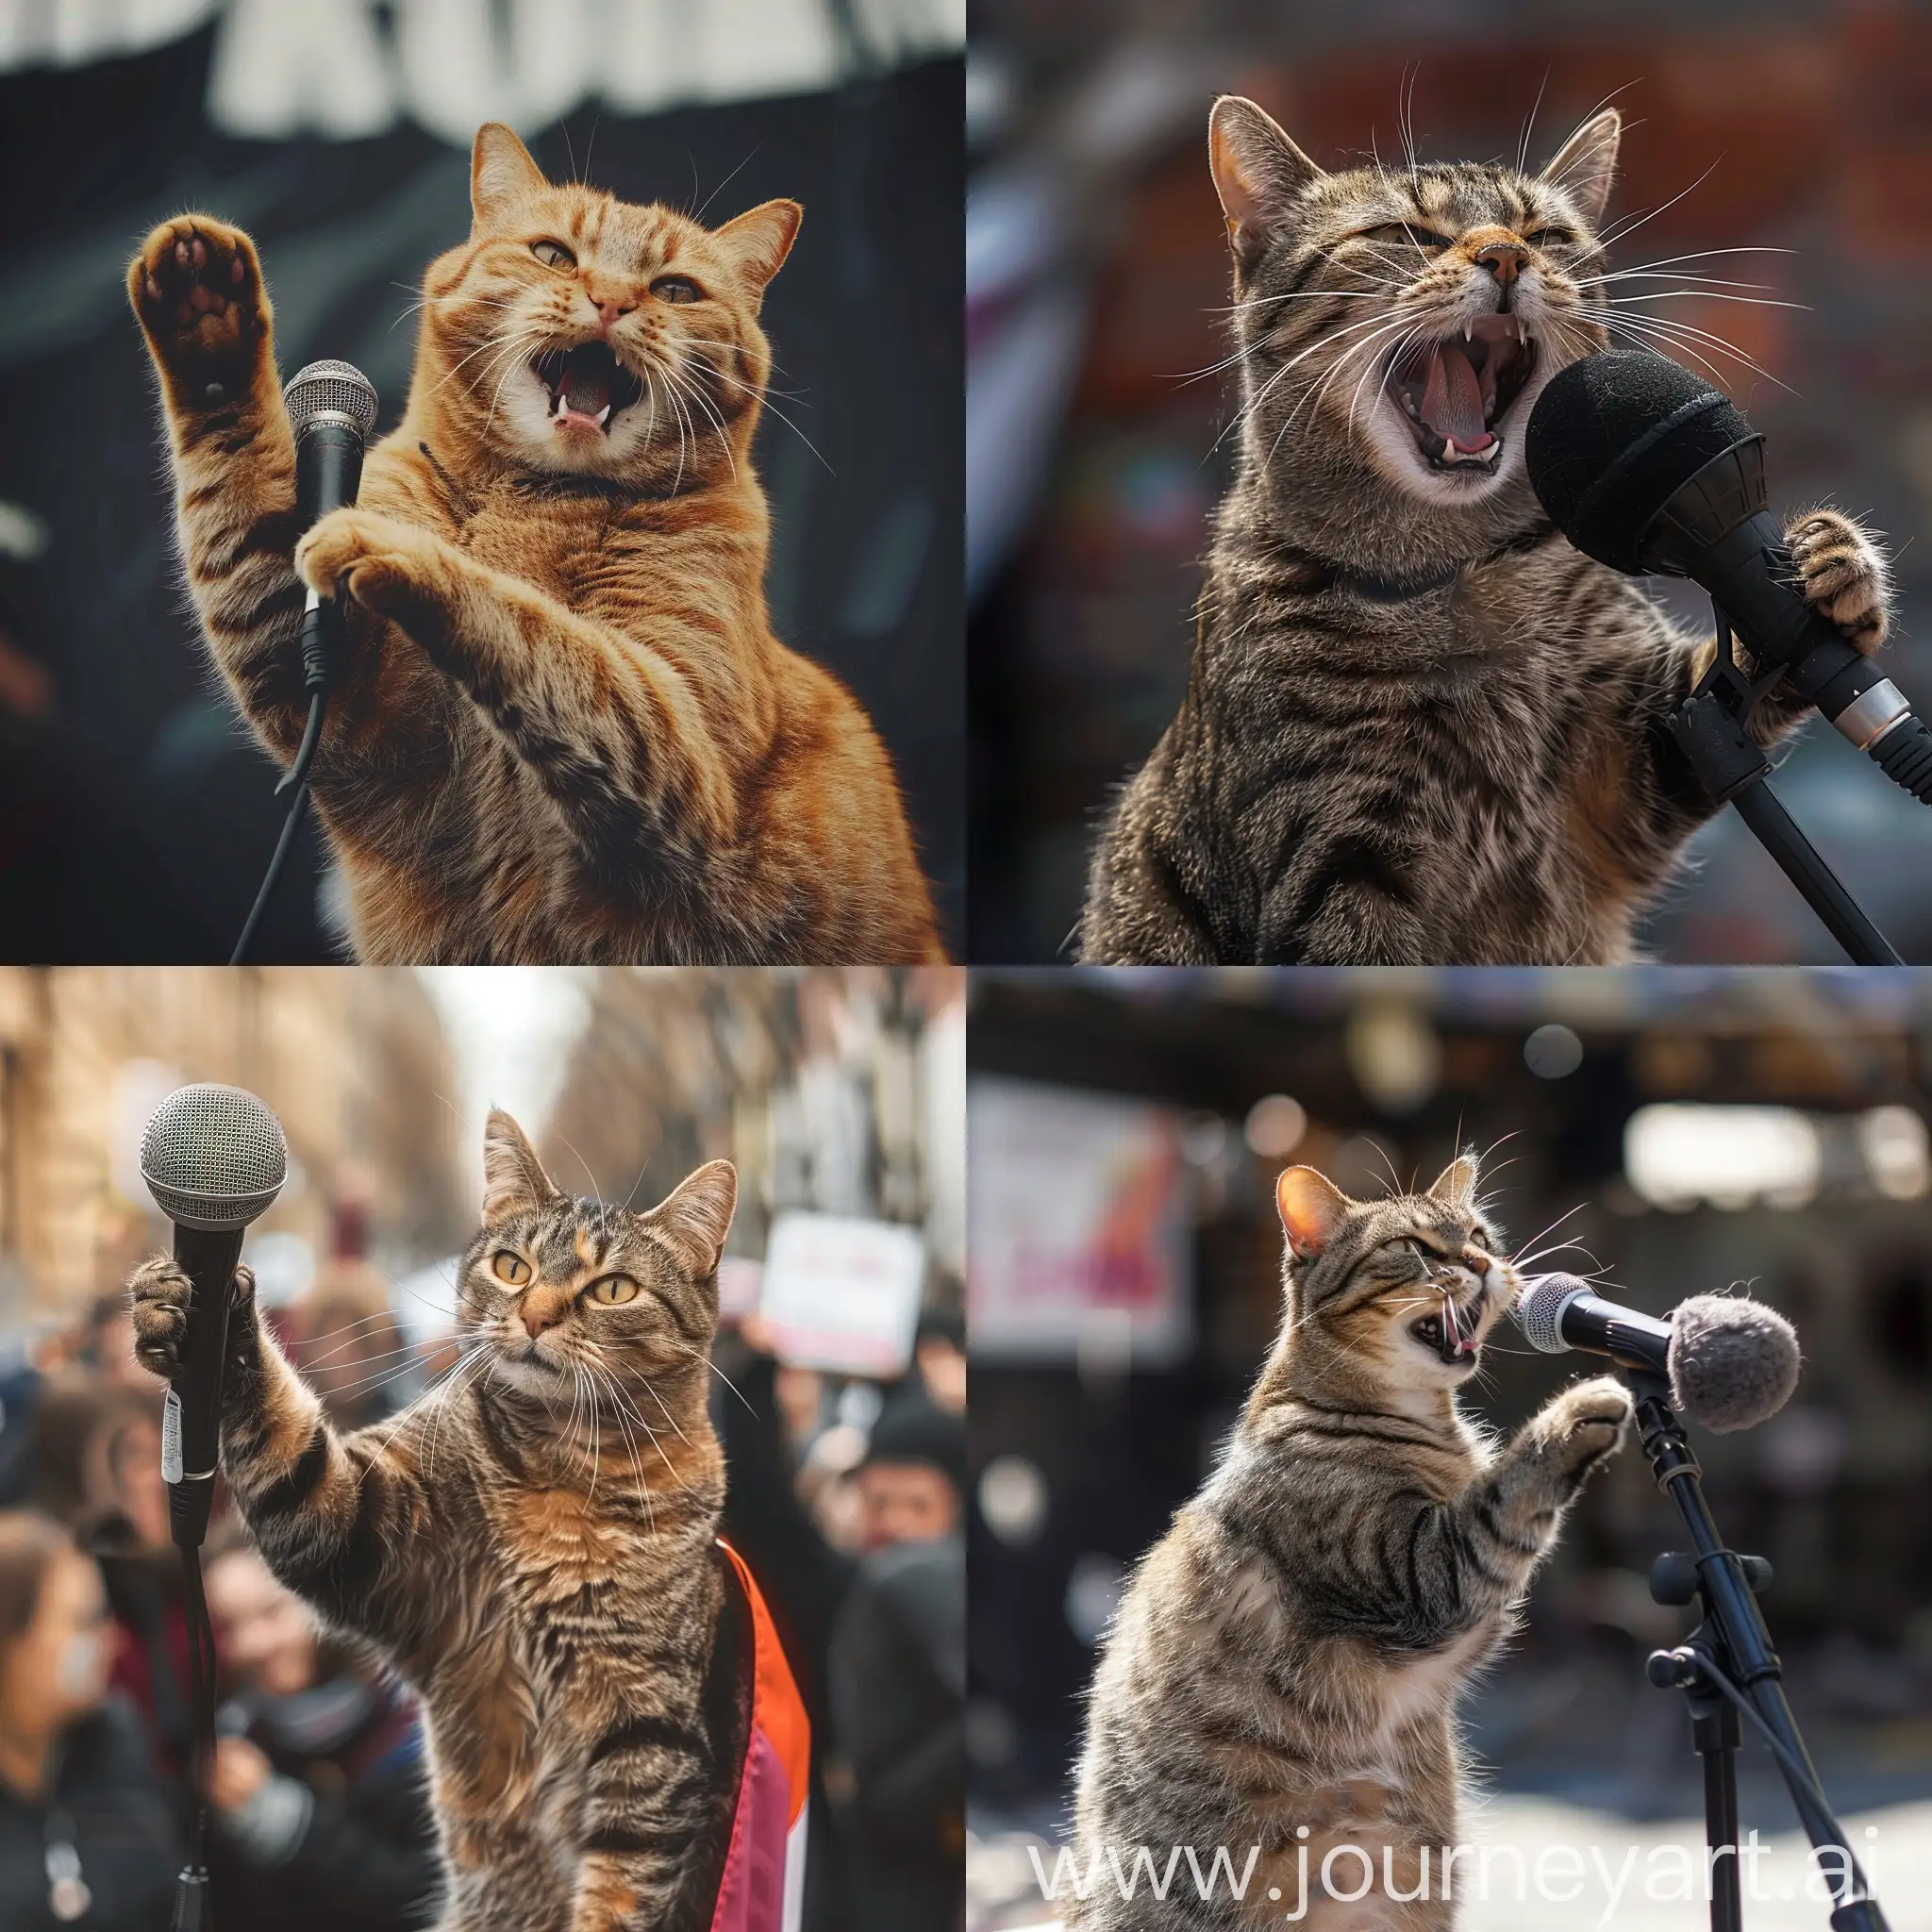 Protesting-Cat-with-Microphone-Feline-Activism-in-Action